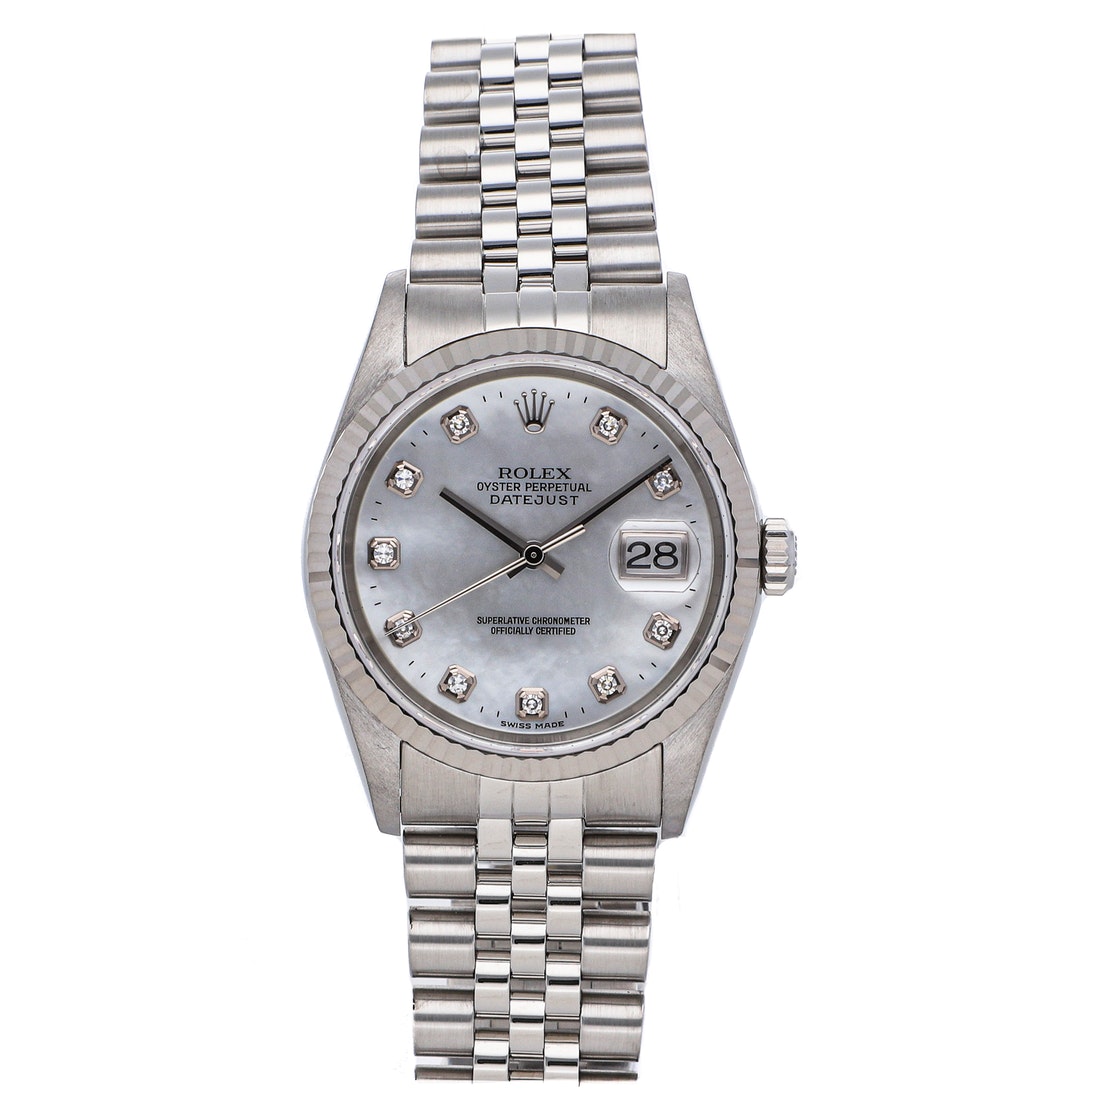 Pre-owned Rolex Mop Diamonds 18k White Gold And Stainless Steel Datejust 16234 Men's Wristwatch 36 Mm